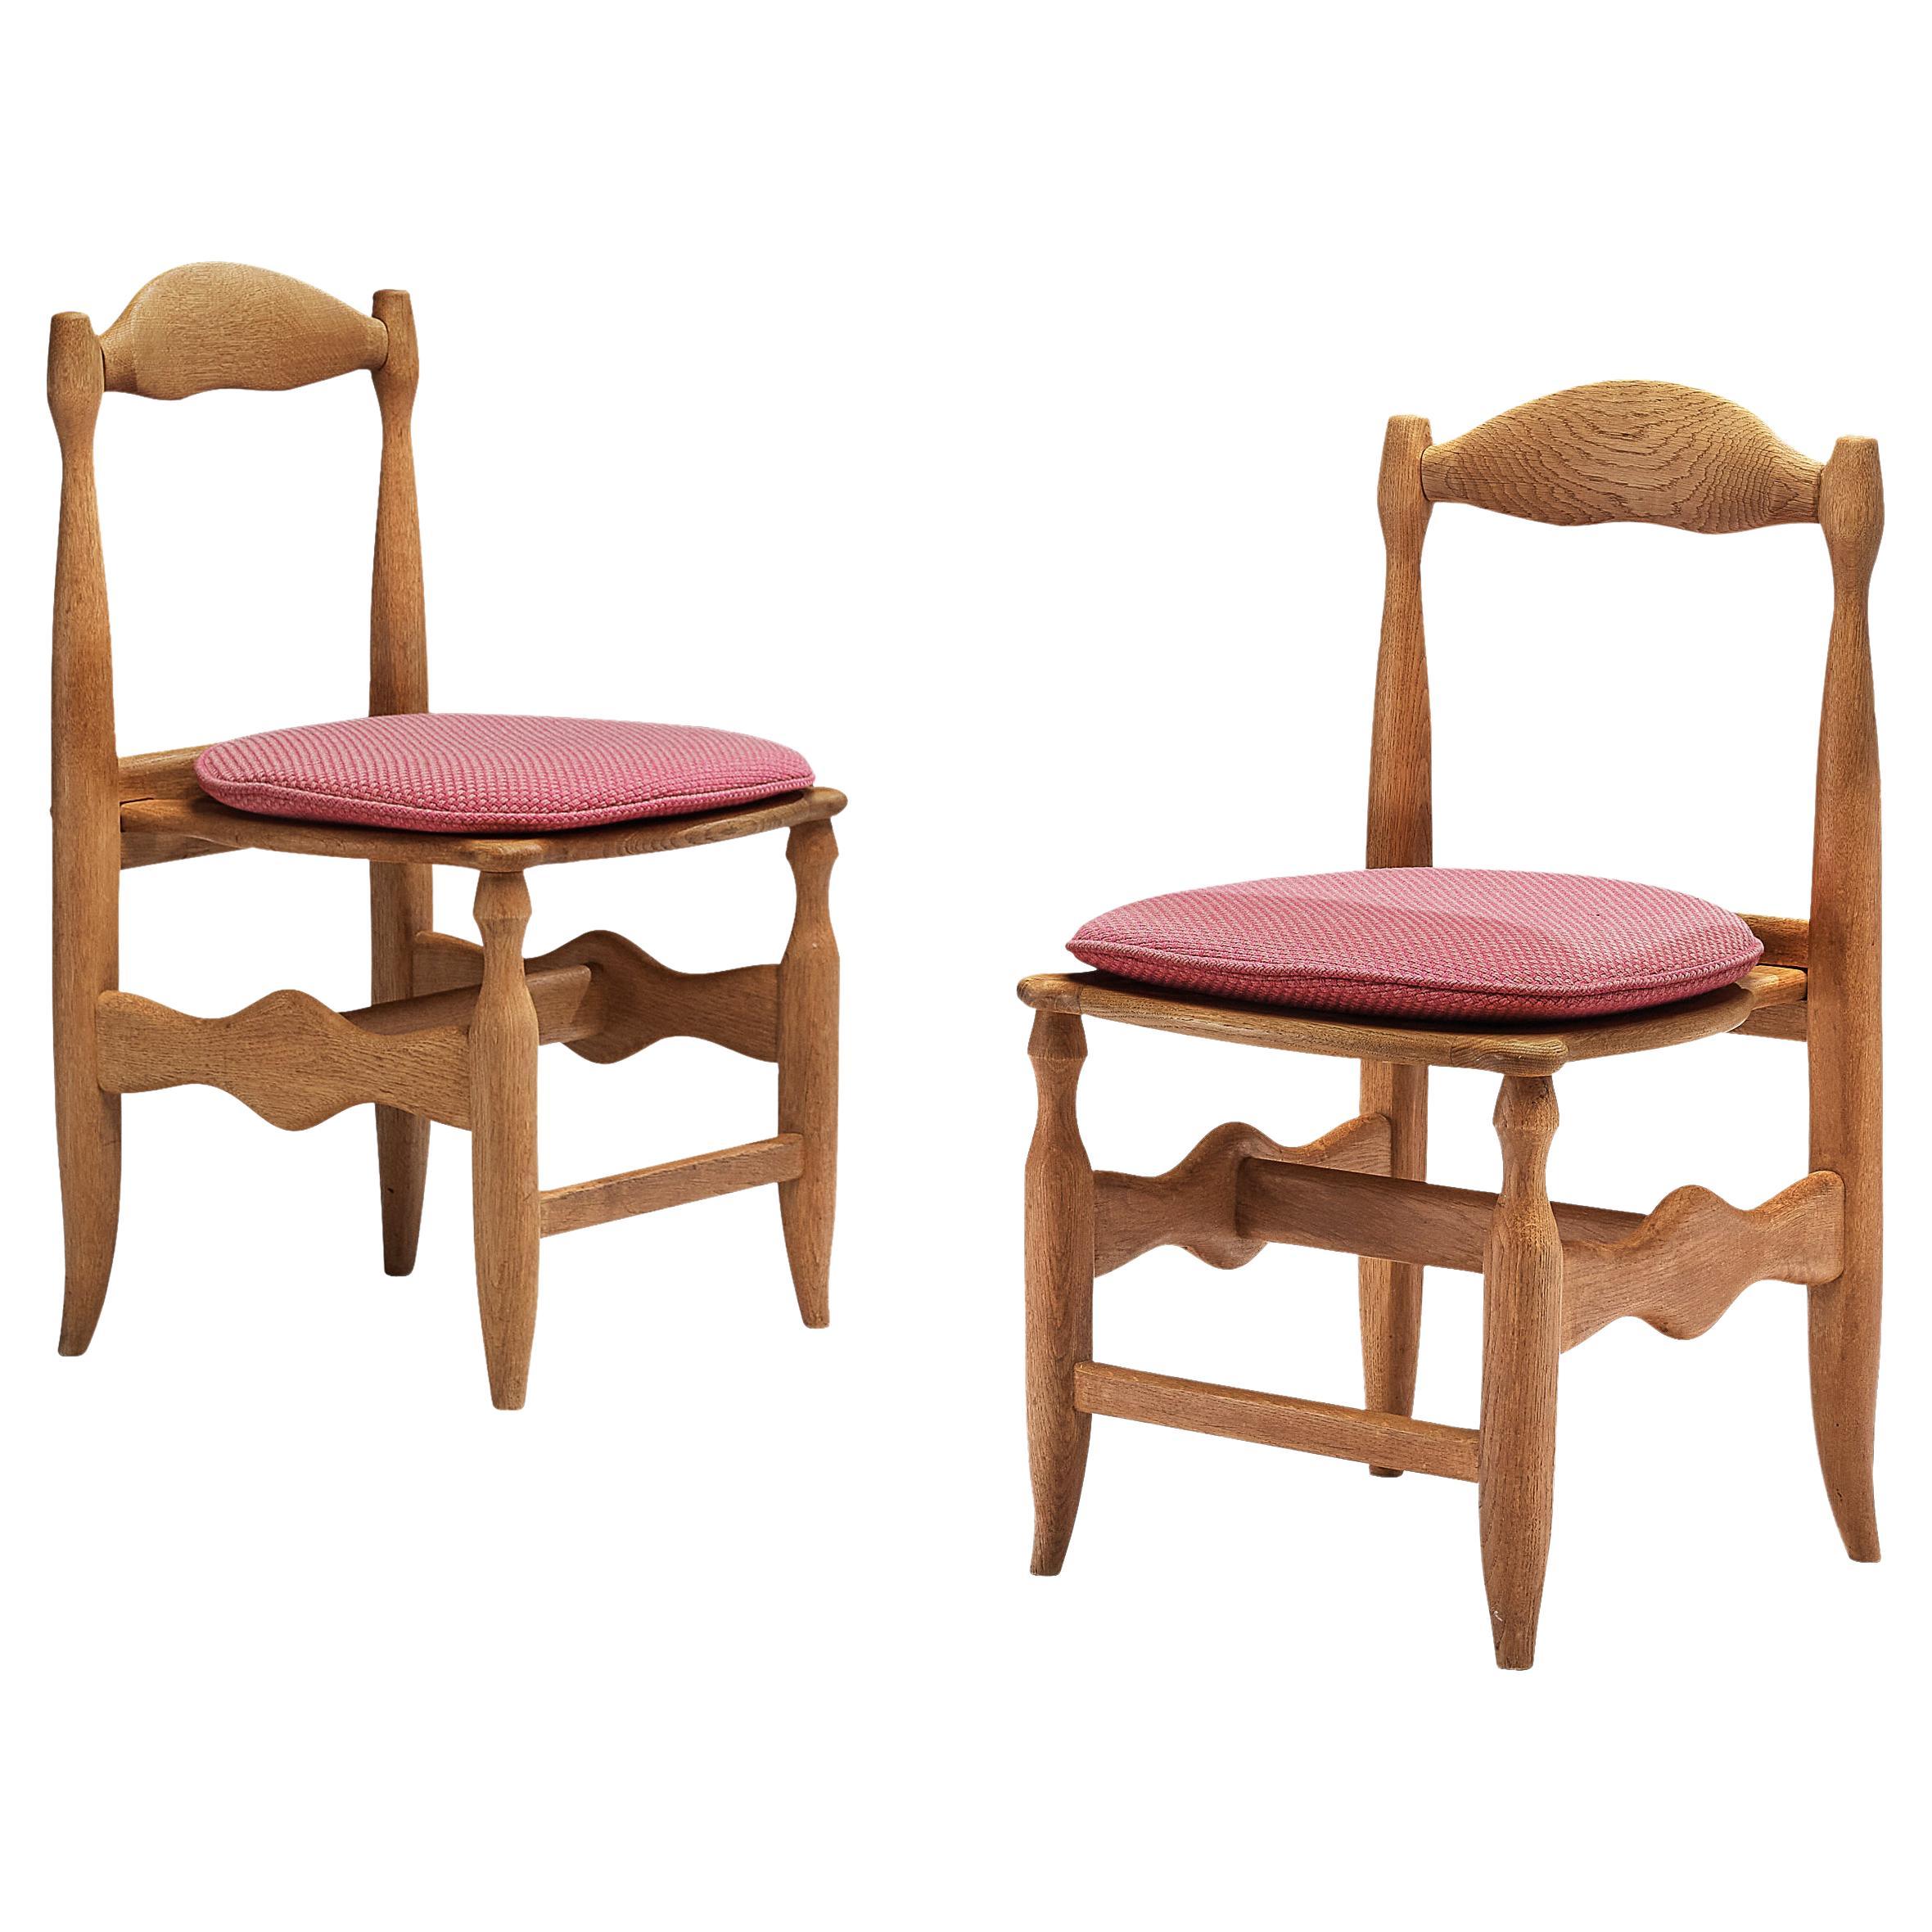 Guillerme et Chambron Pair of Dining Chairs in Oak and Pink Fabric